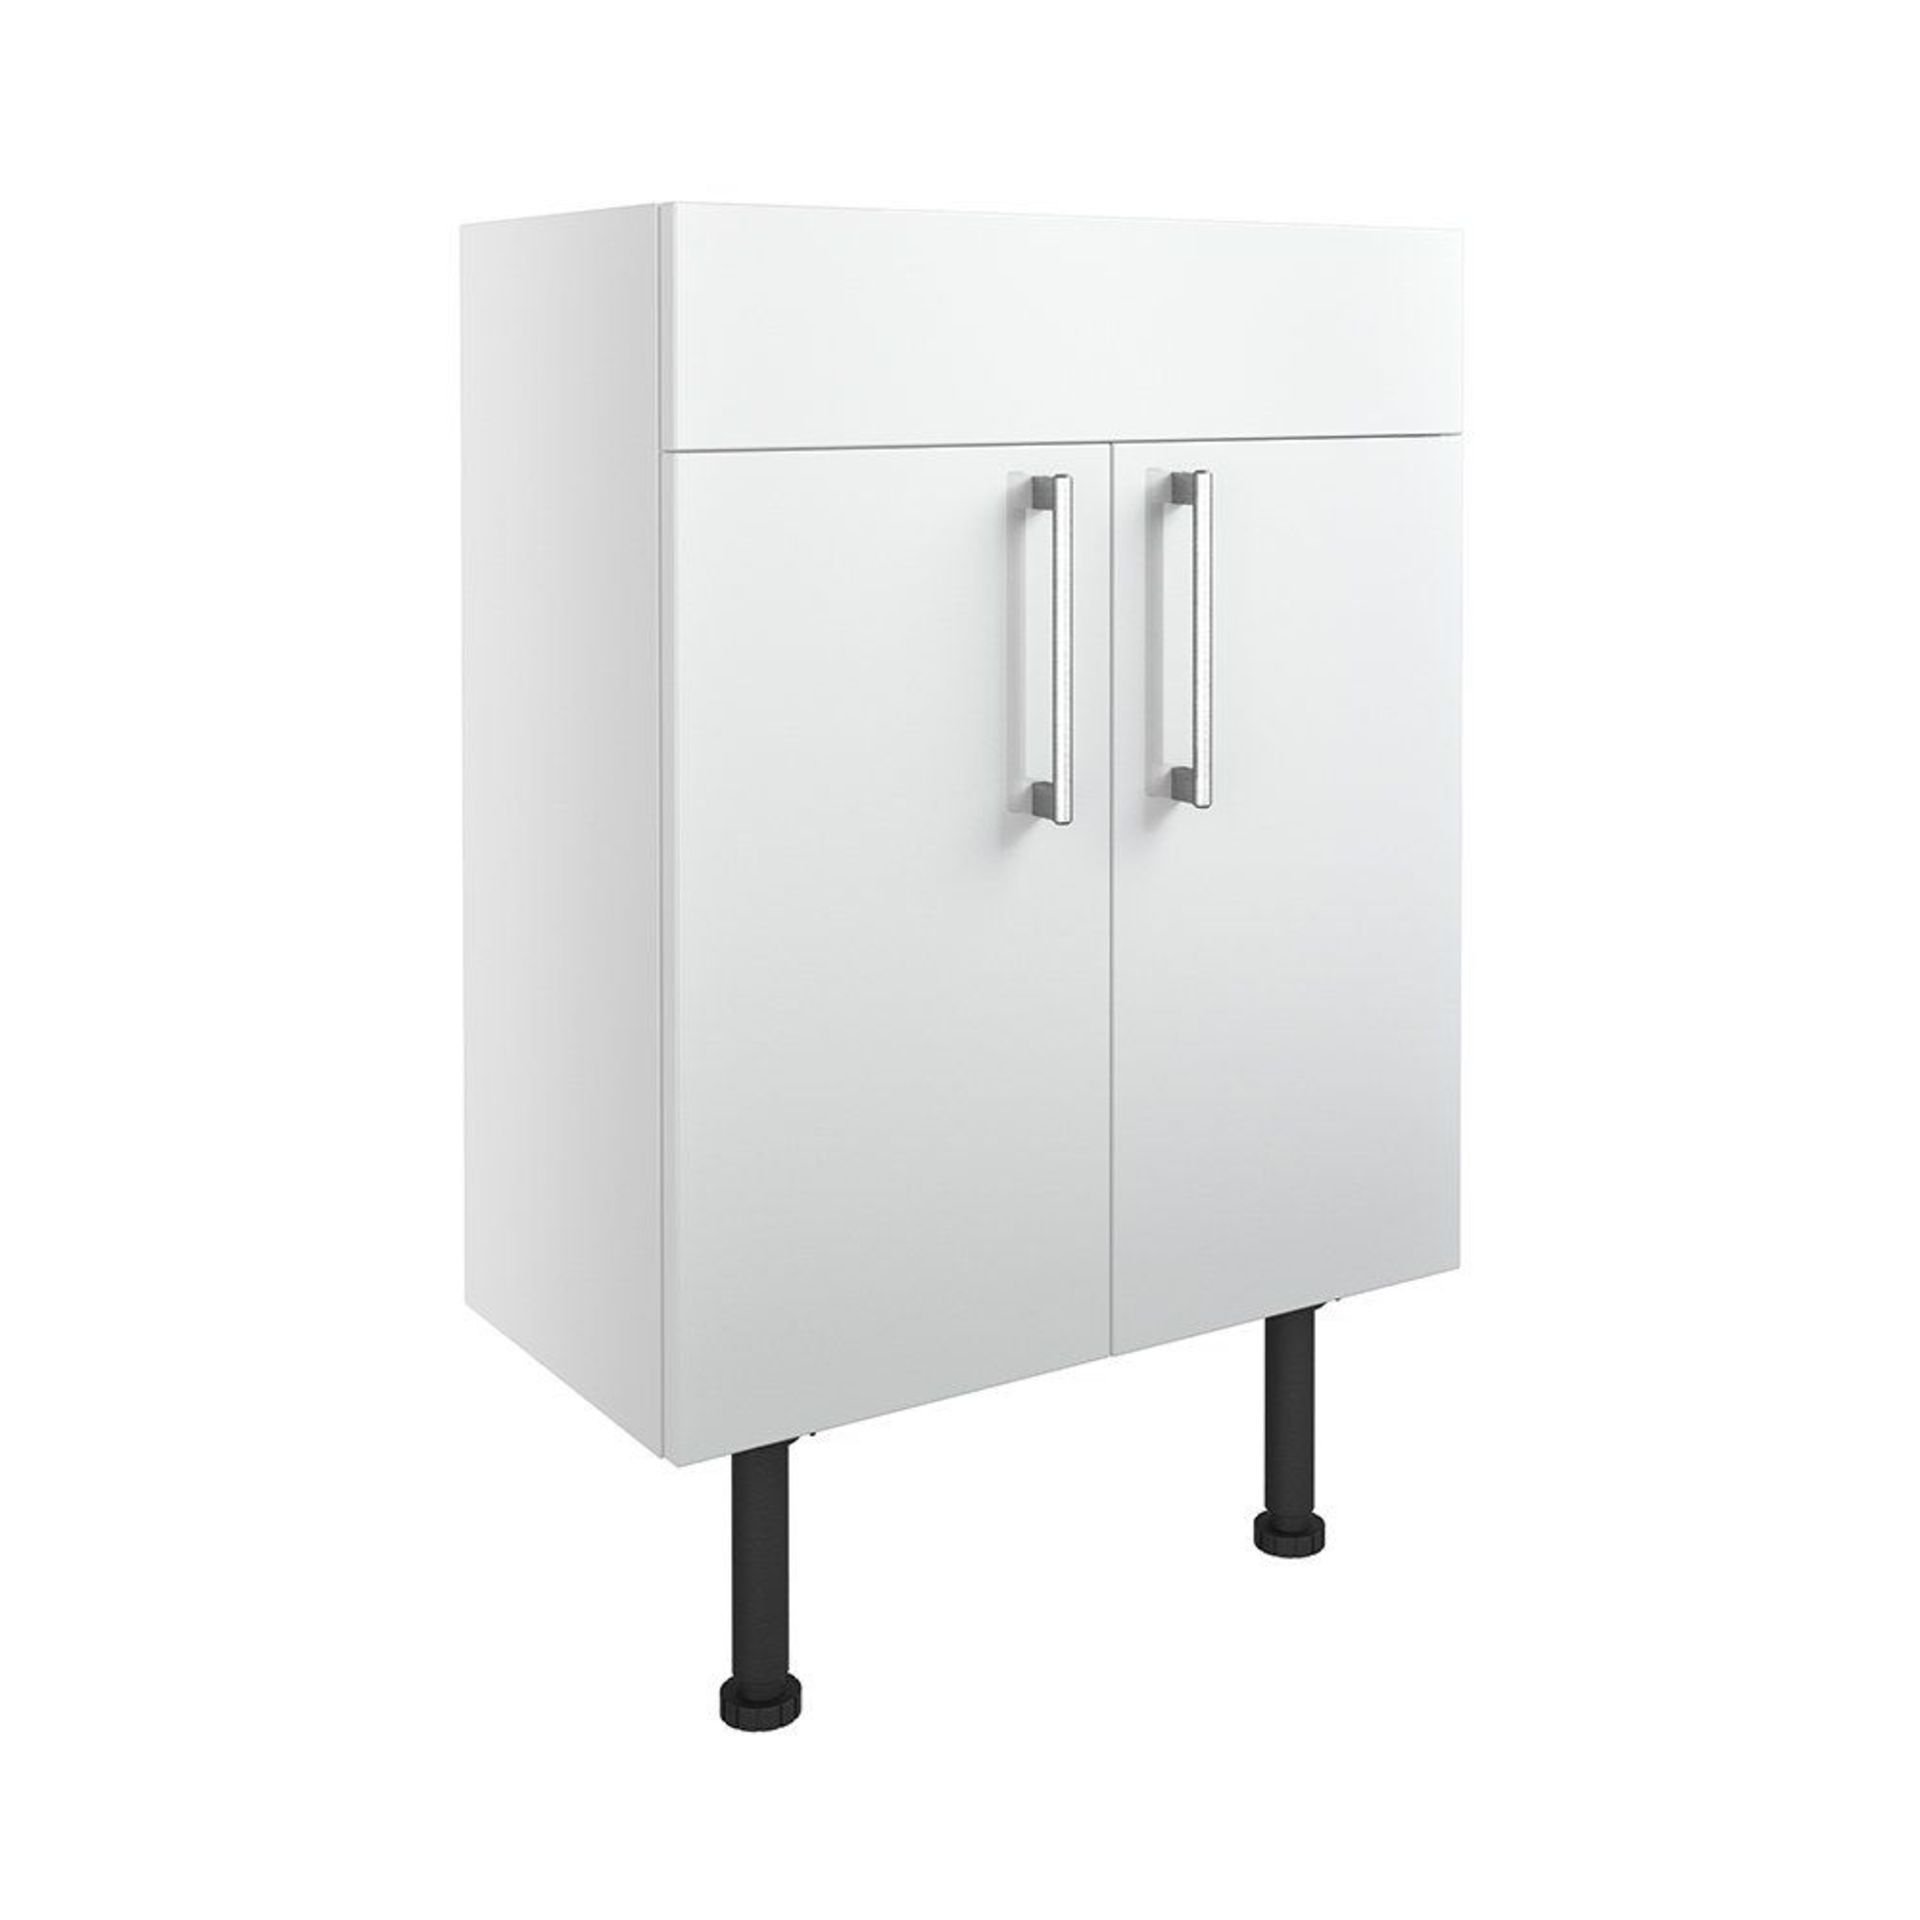 (AX35) New Alba 600mm Basin Unit - White Gloss. RRP £304.00. Alba range of fitted furniture is